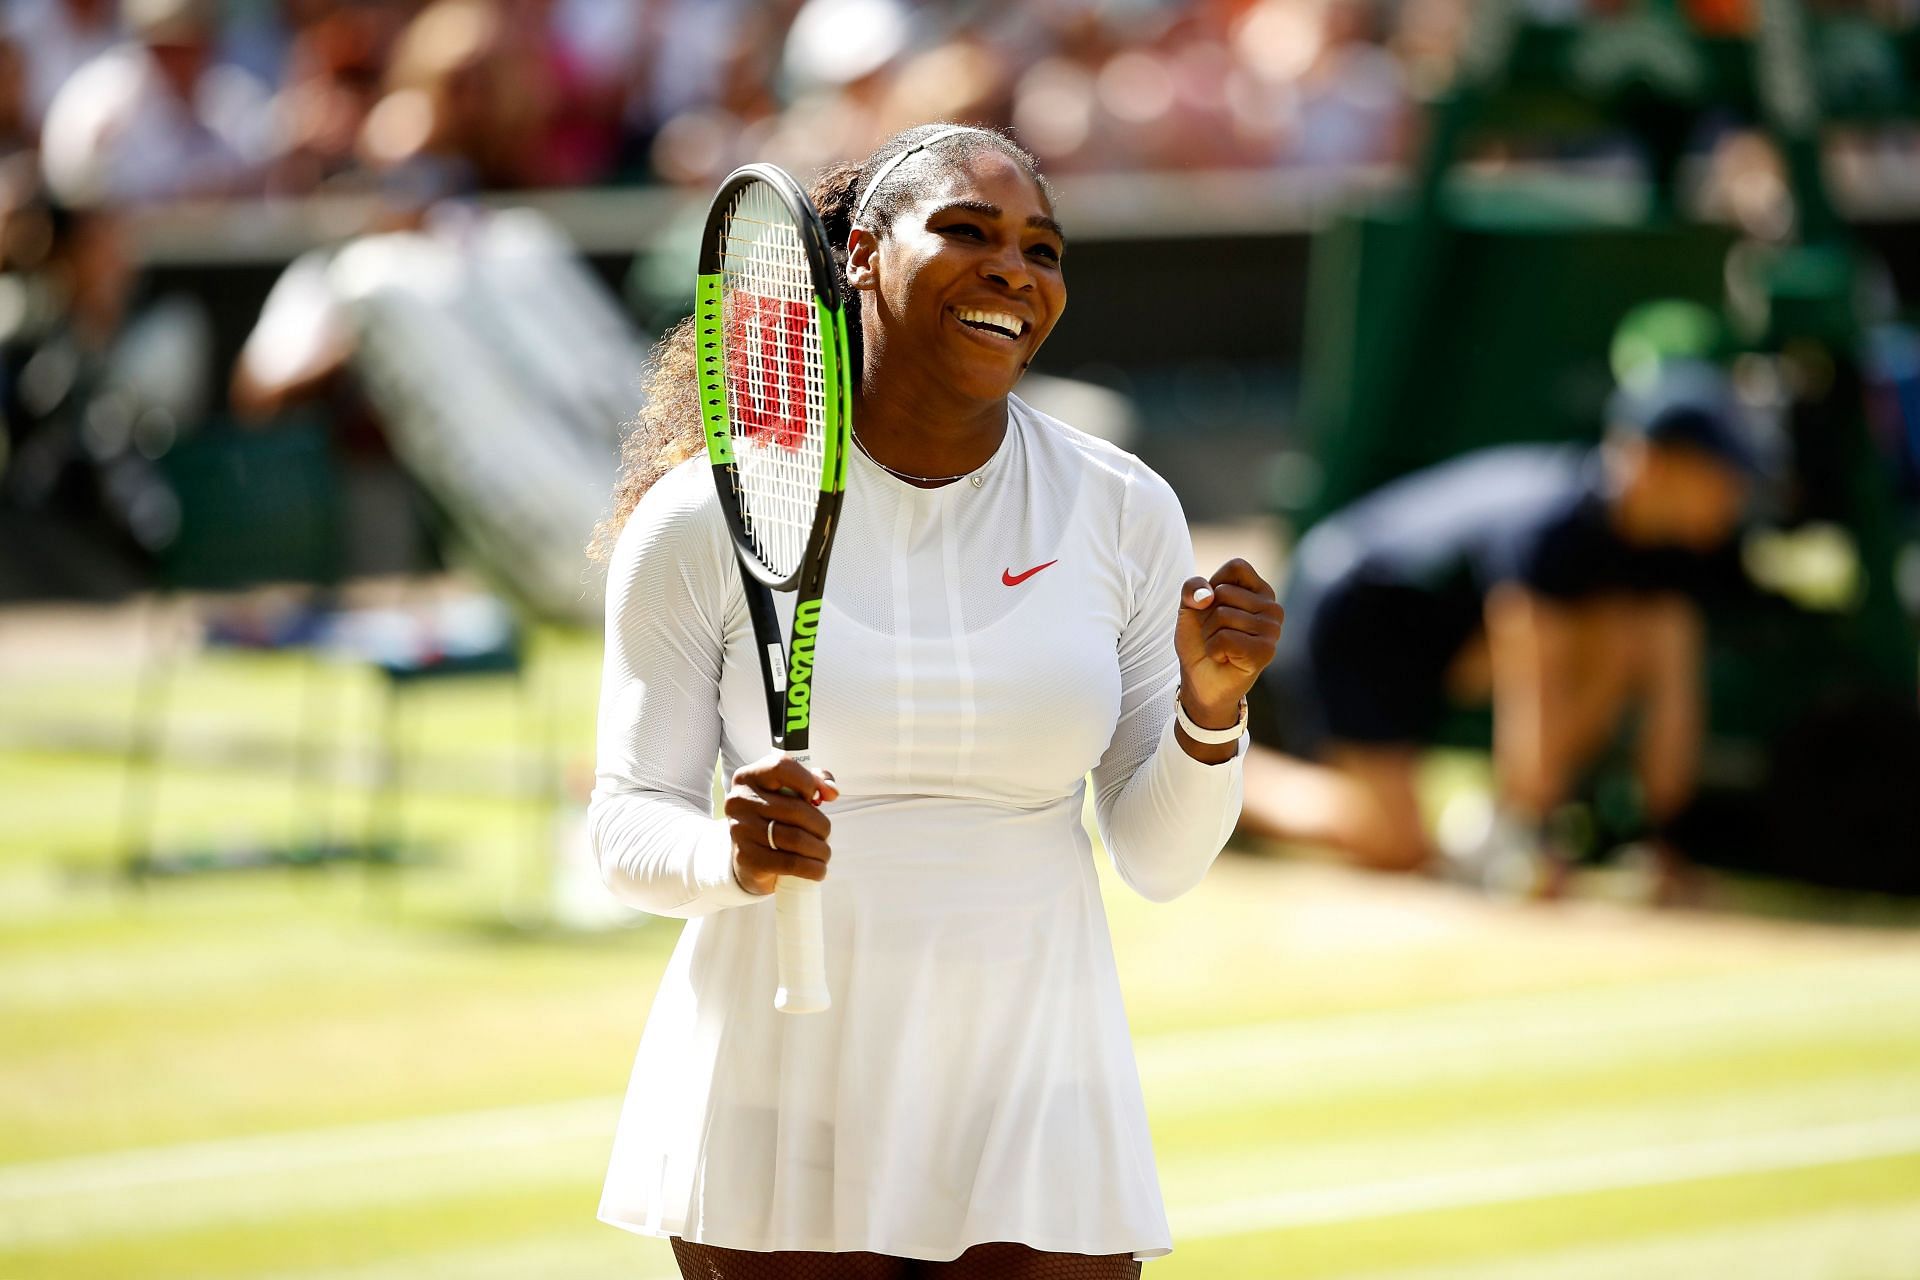 Since 1998, Serena Williams has missed Wimbledon only thrice till date